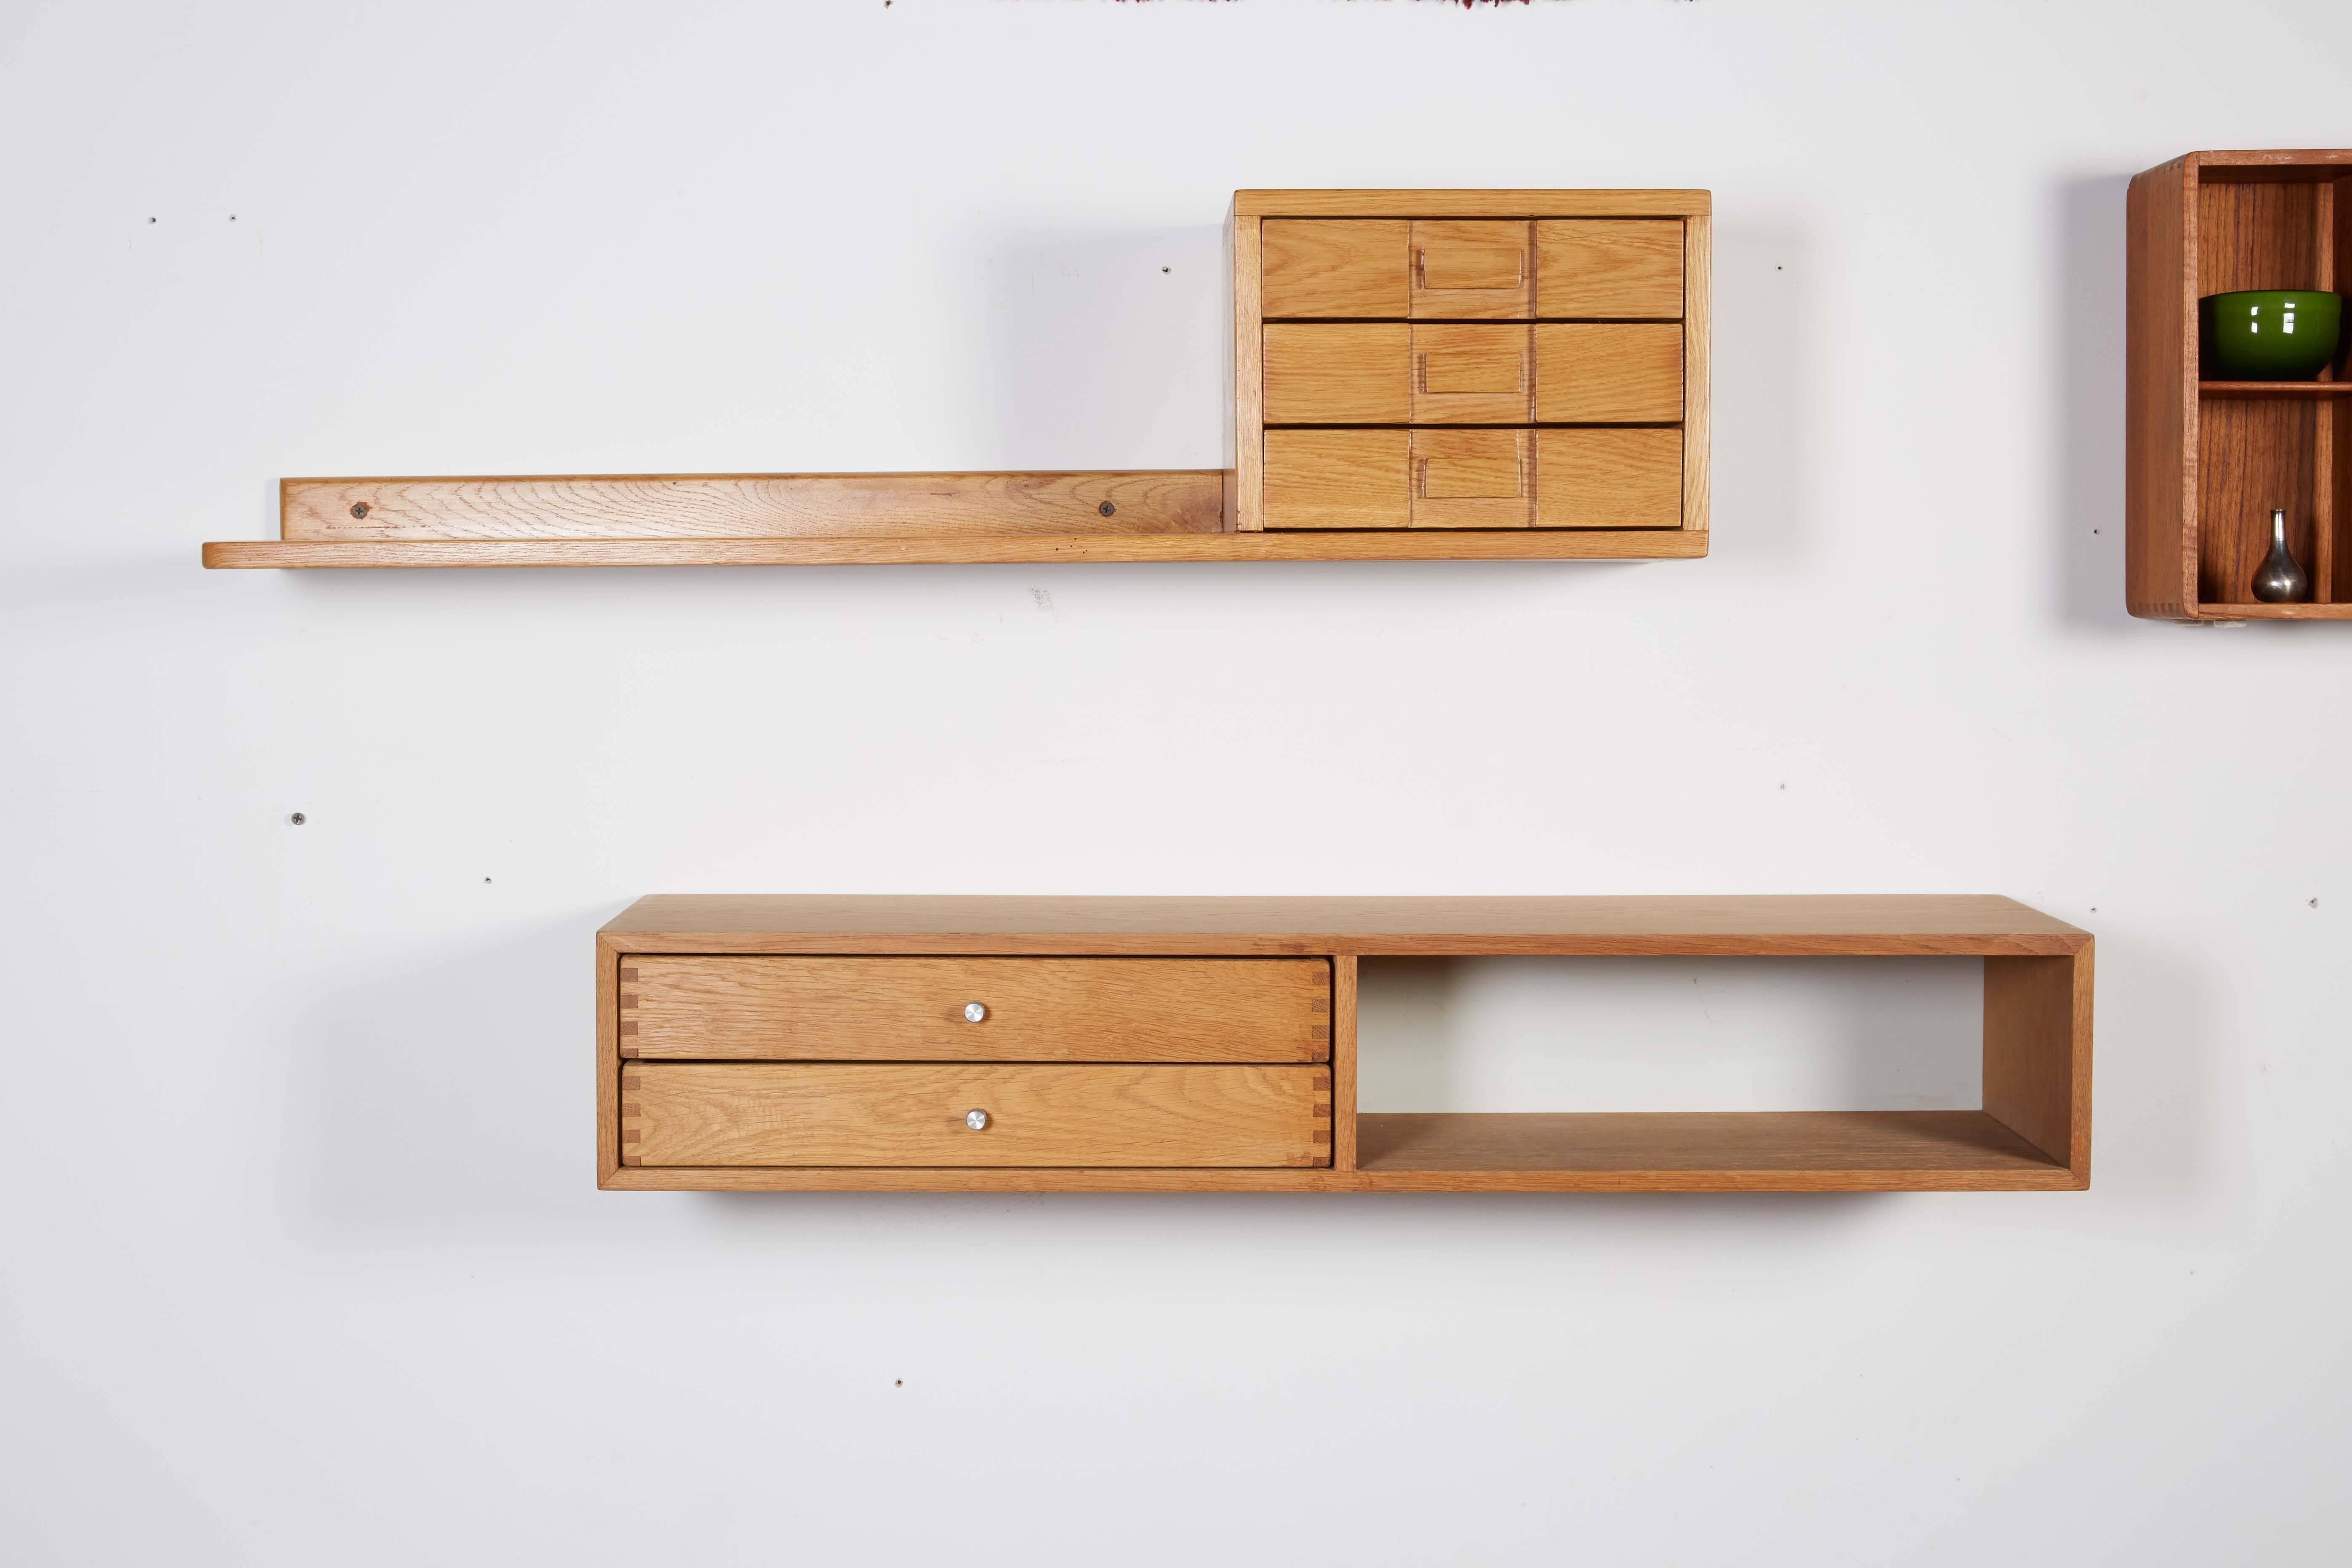 Mid Century 1950s Kai Kristiansen Shelf

This vintage shelf is quite rare. Other dealers are selling them for thousands. Excellent condition. Ready for pick up, delivery, or shipping anywhere in the world. 